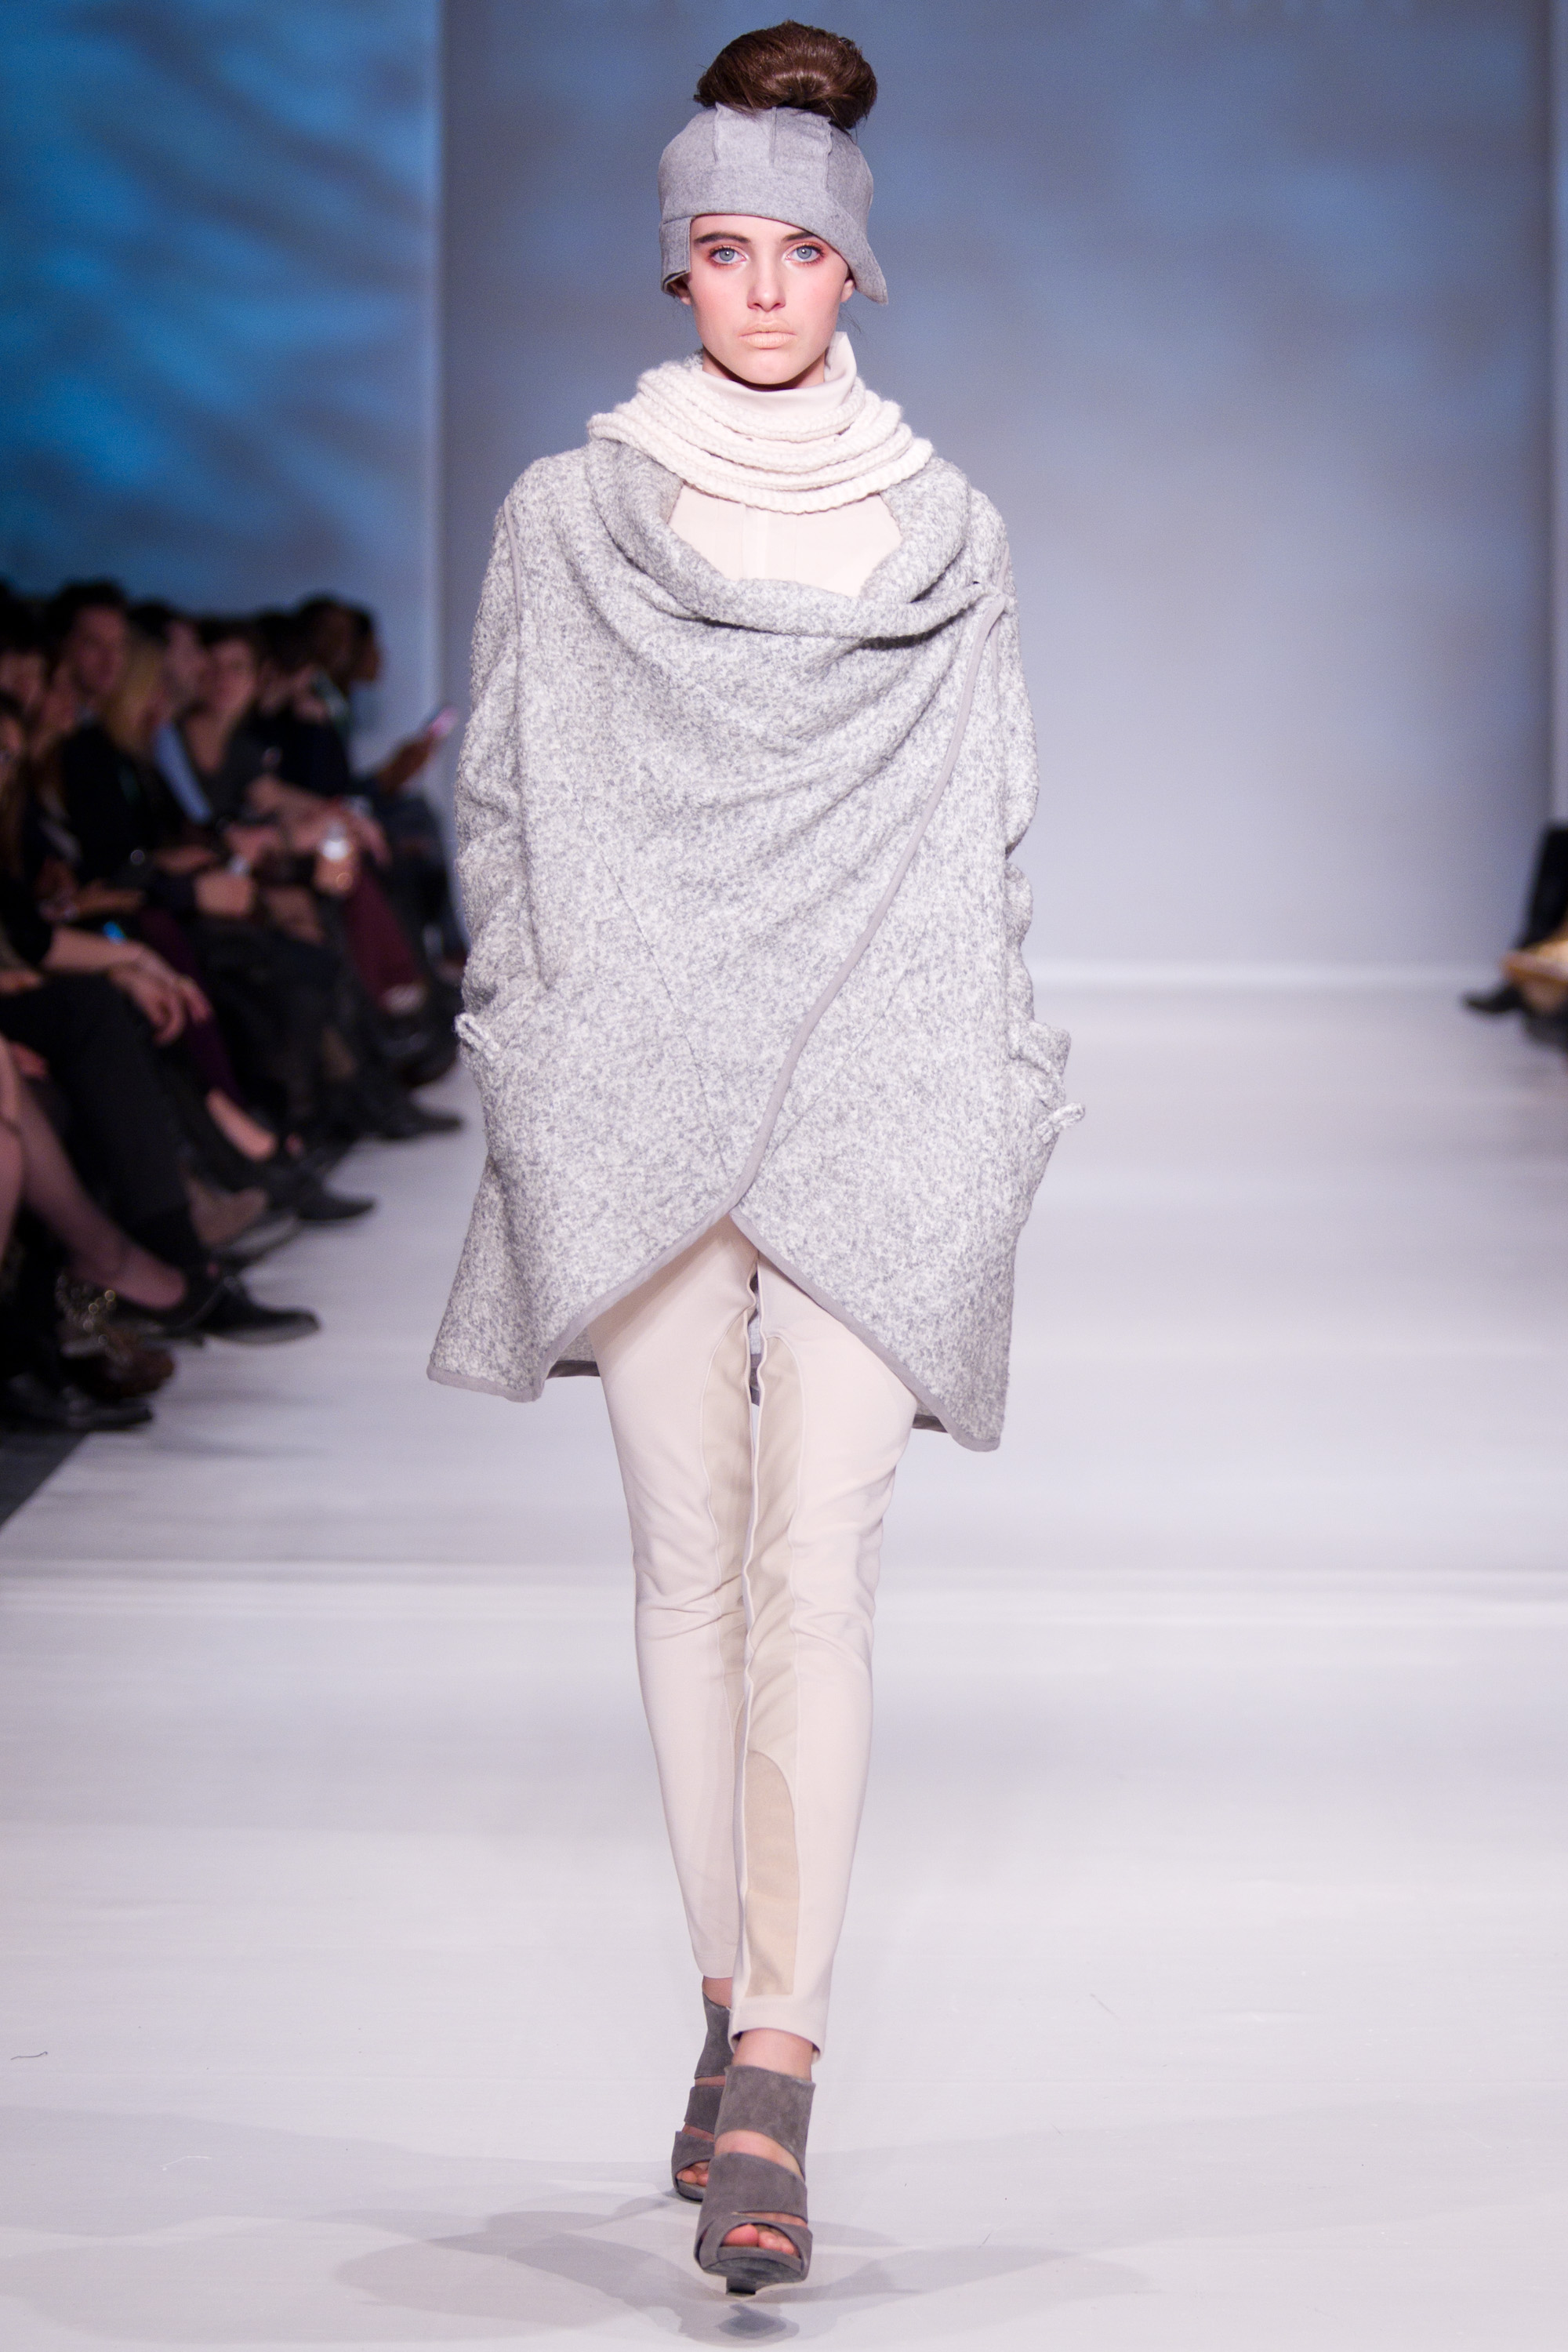 Montreal Fashion Week Day 2: Melissa Nepton’s Ice Queen Collection